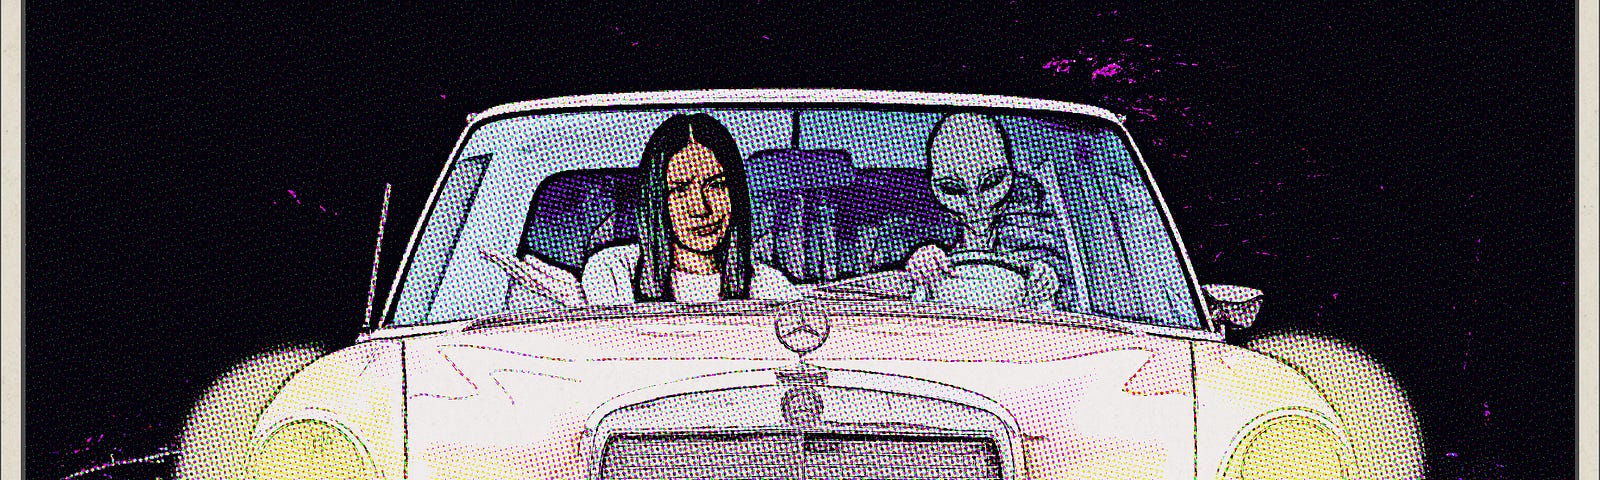 Woman in car with alien